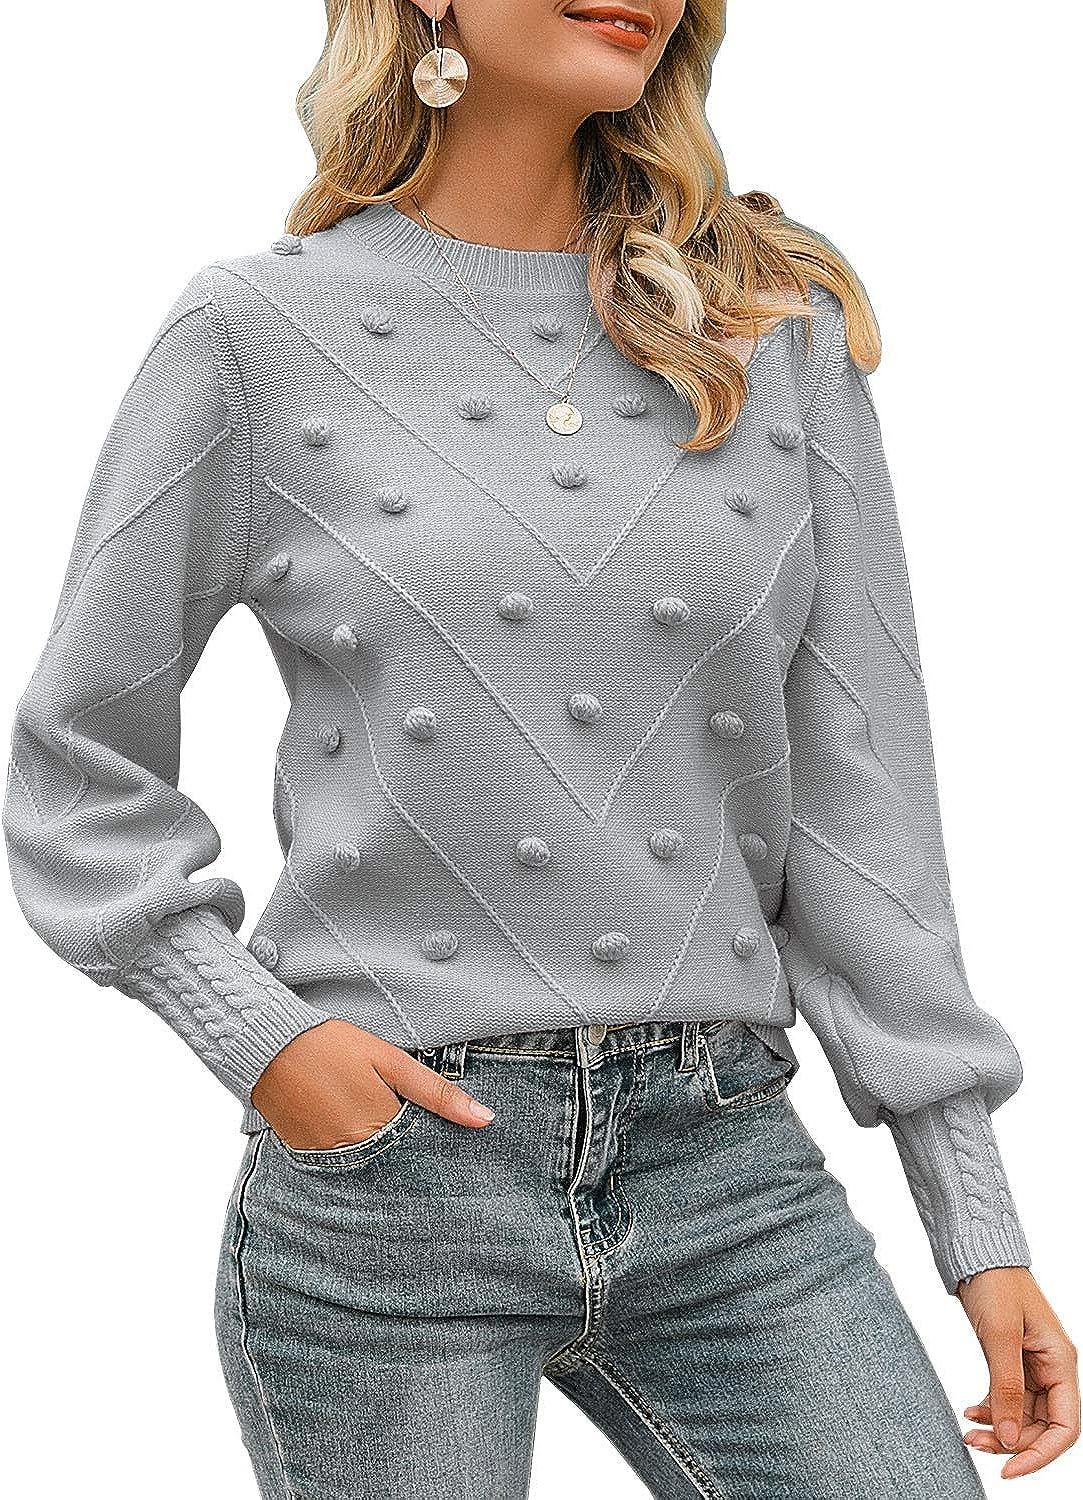 Miessial Women's Crew Neck Lantern Sleeve Sweater Pullover Elegant Knit Jumper Top (10, Gray) at ... | Amazon (US)